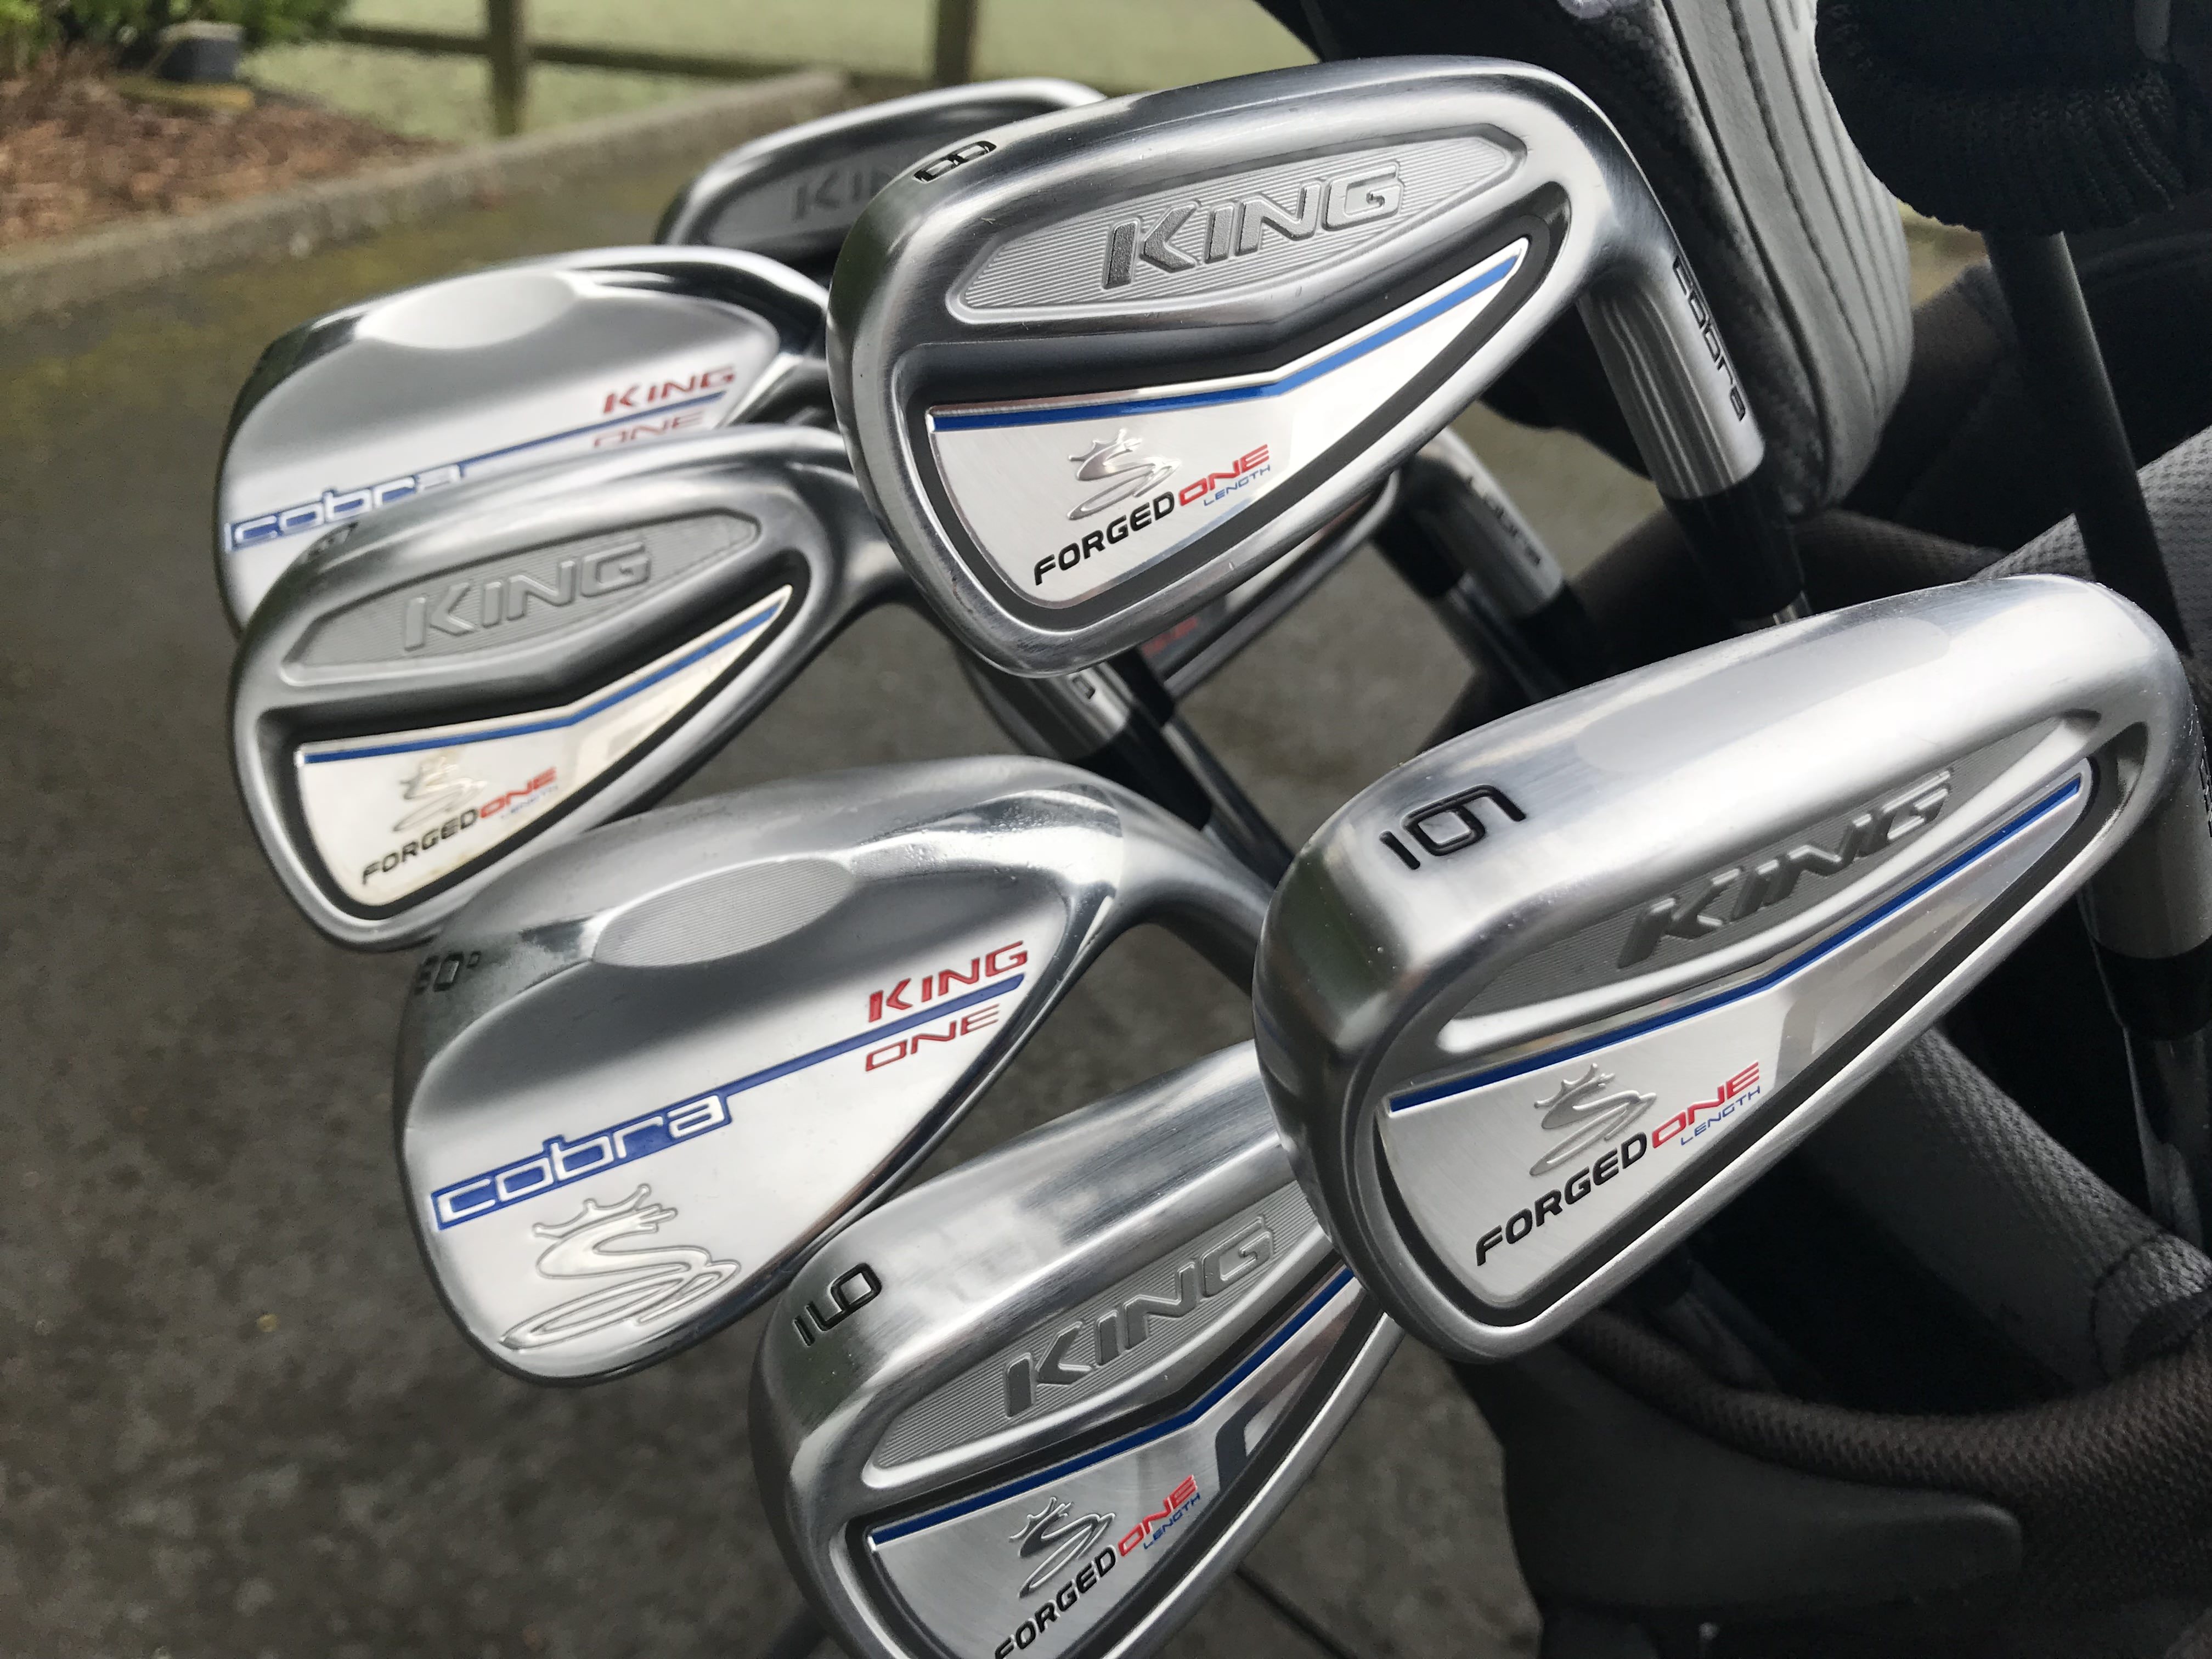 Are Cobra's One Length irons the real deal? We're about to spend a year finding out